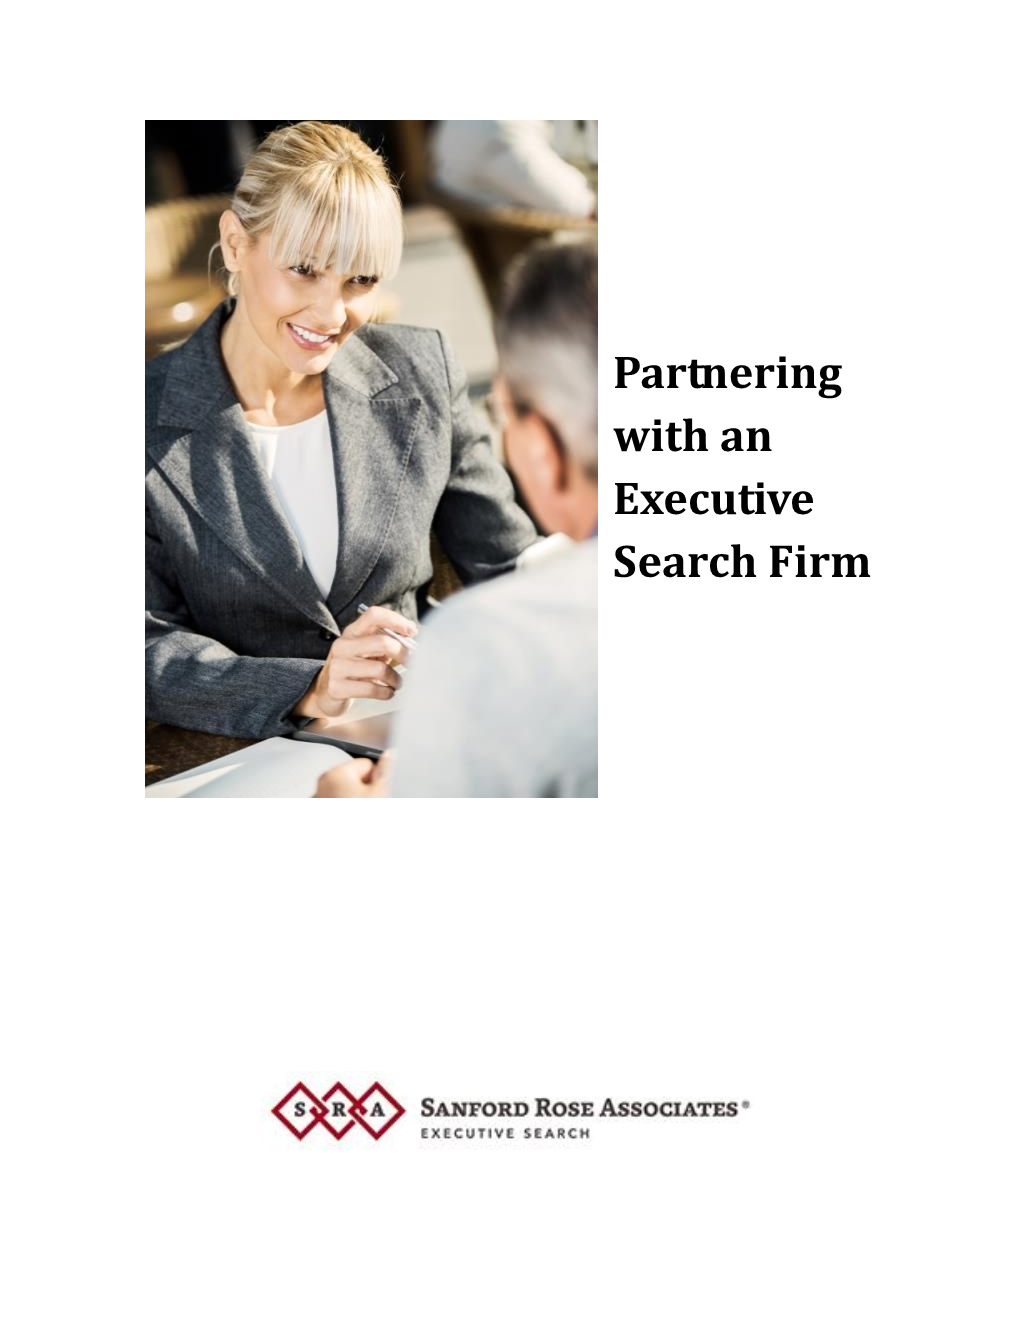 Partnering with an Executive Search Firm